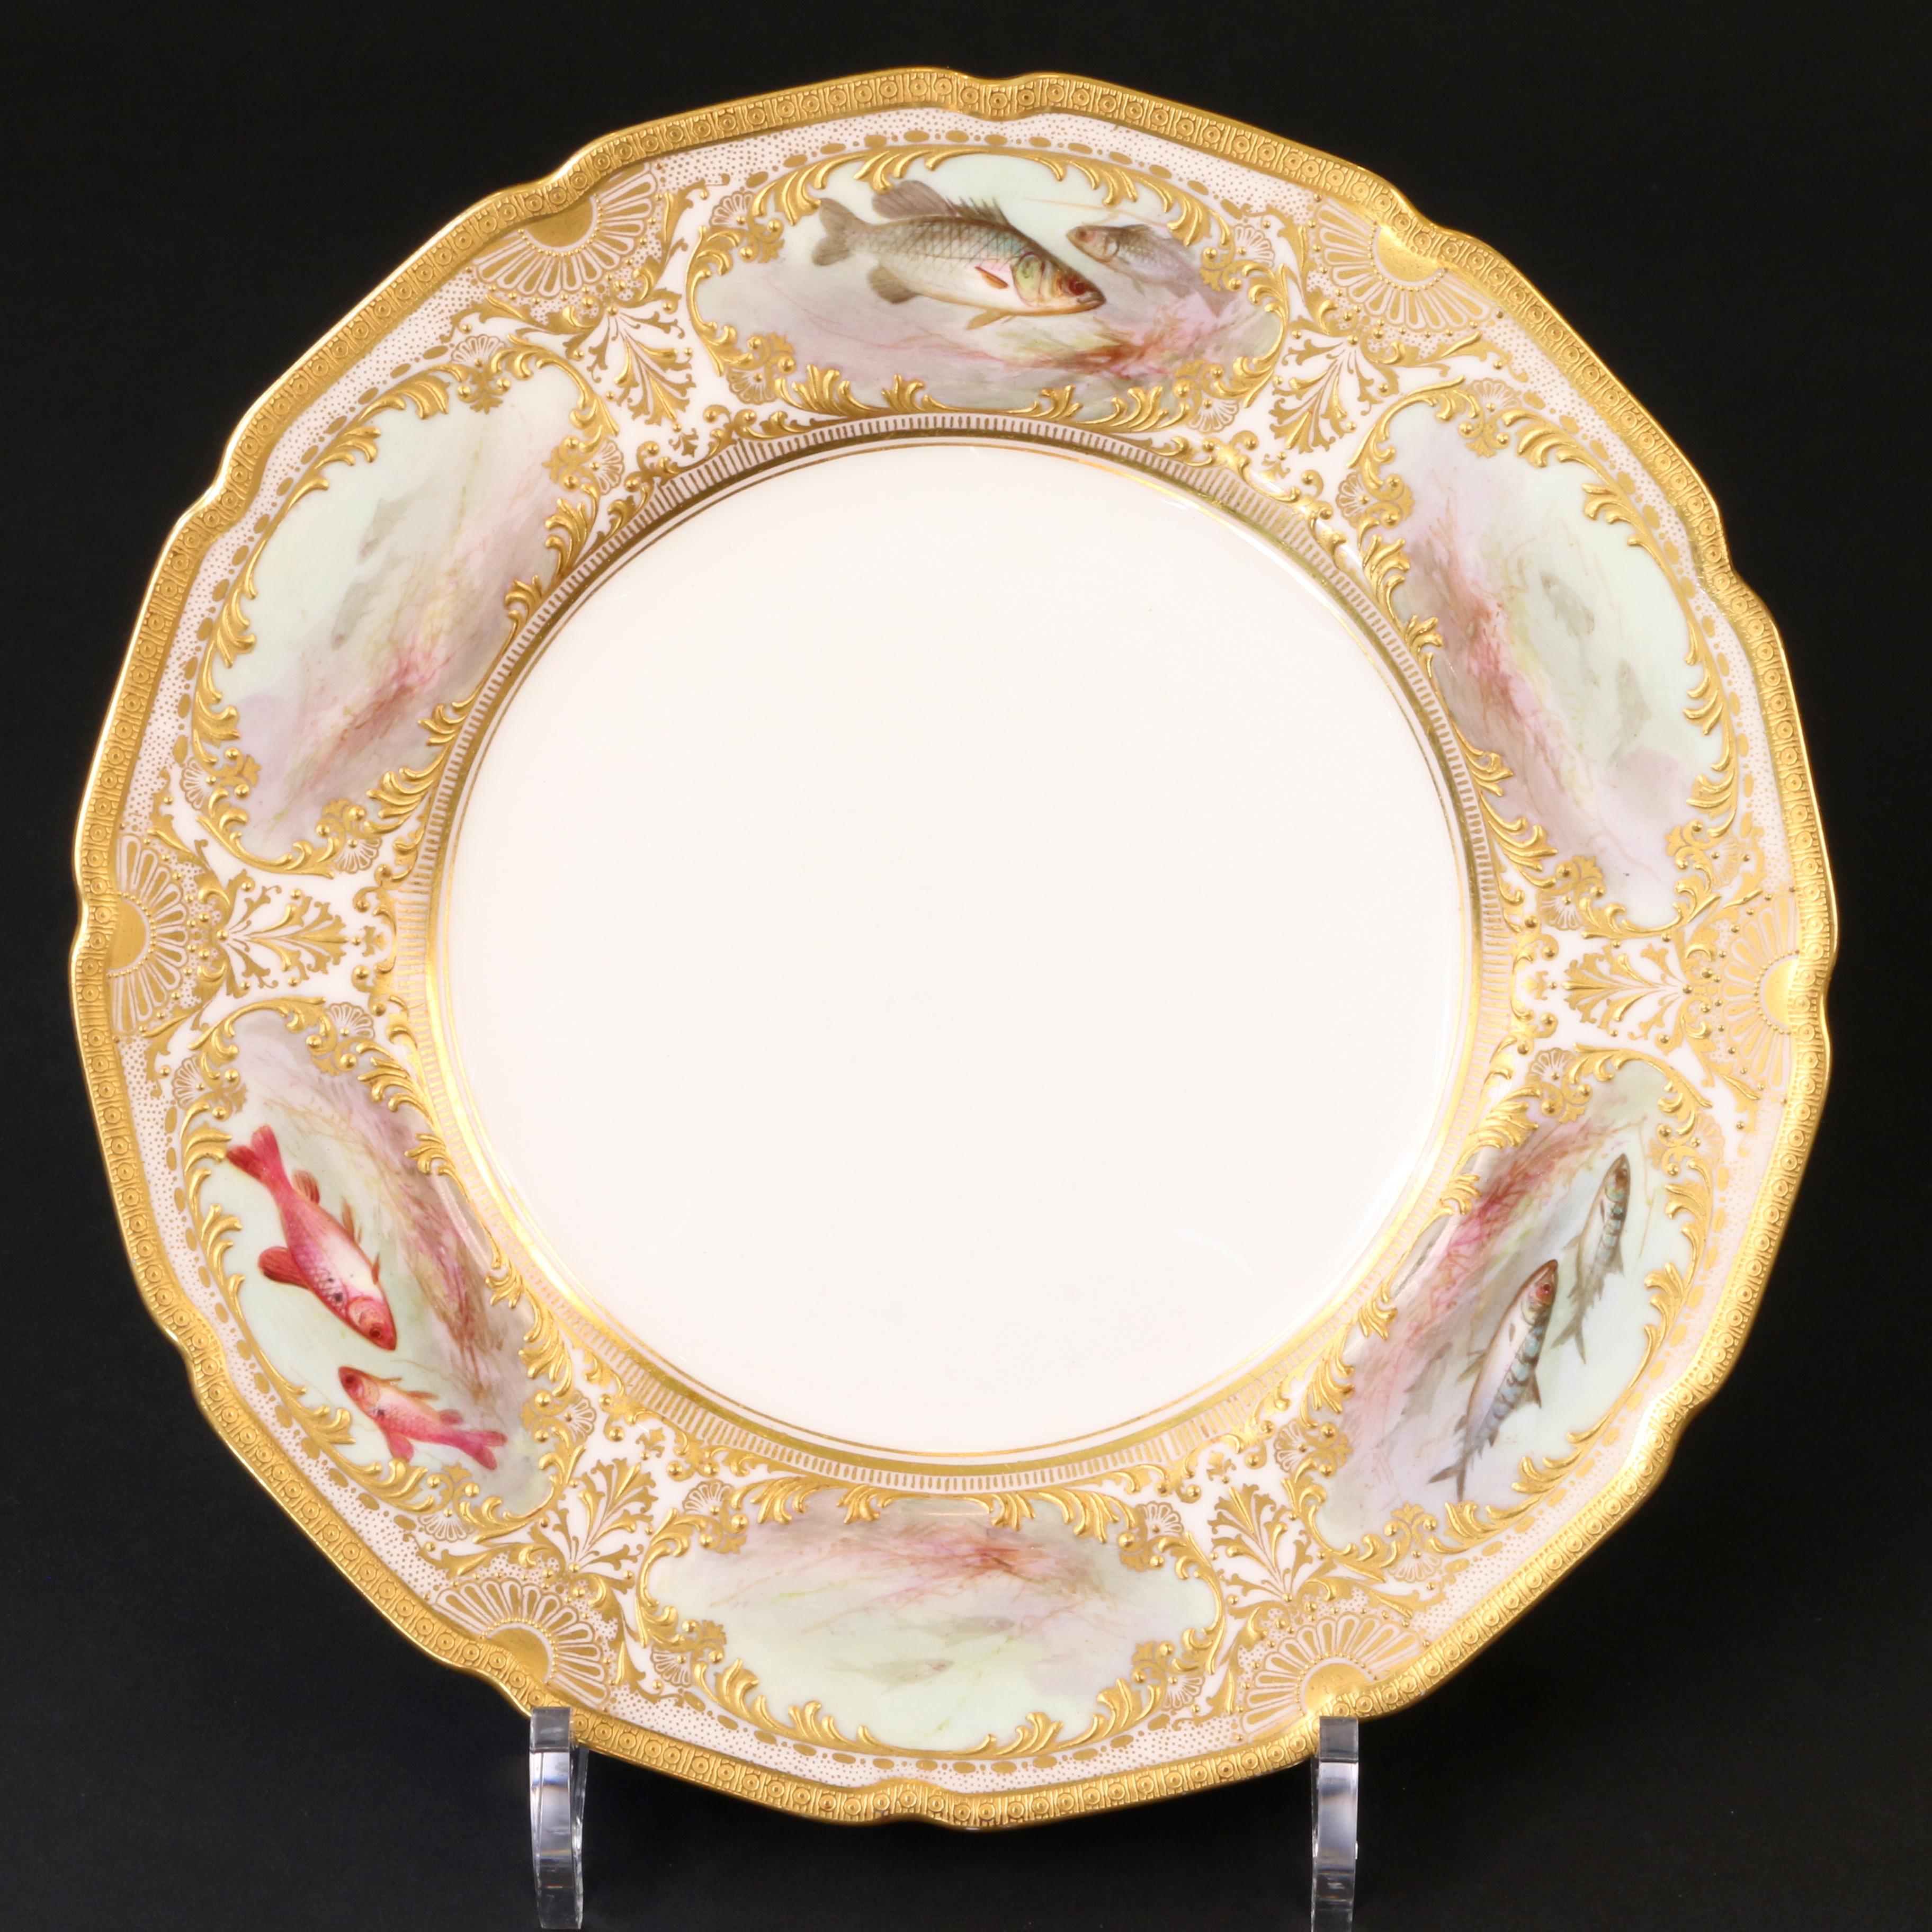 12 Royal Doulton Hand Painted and Heavily Gilded Fish Plates For Sale 5